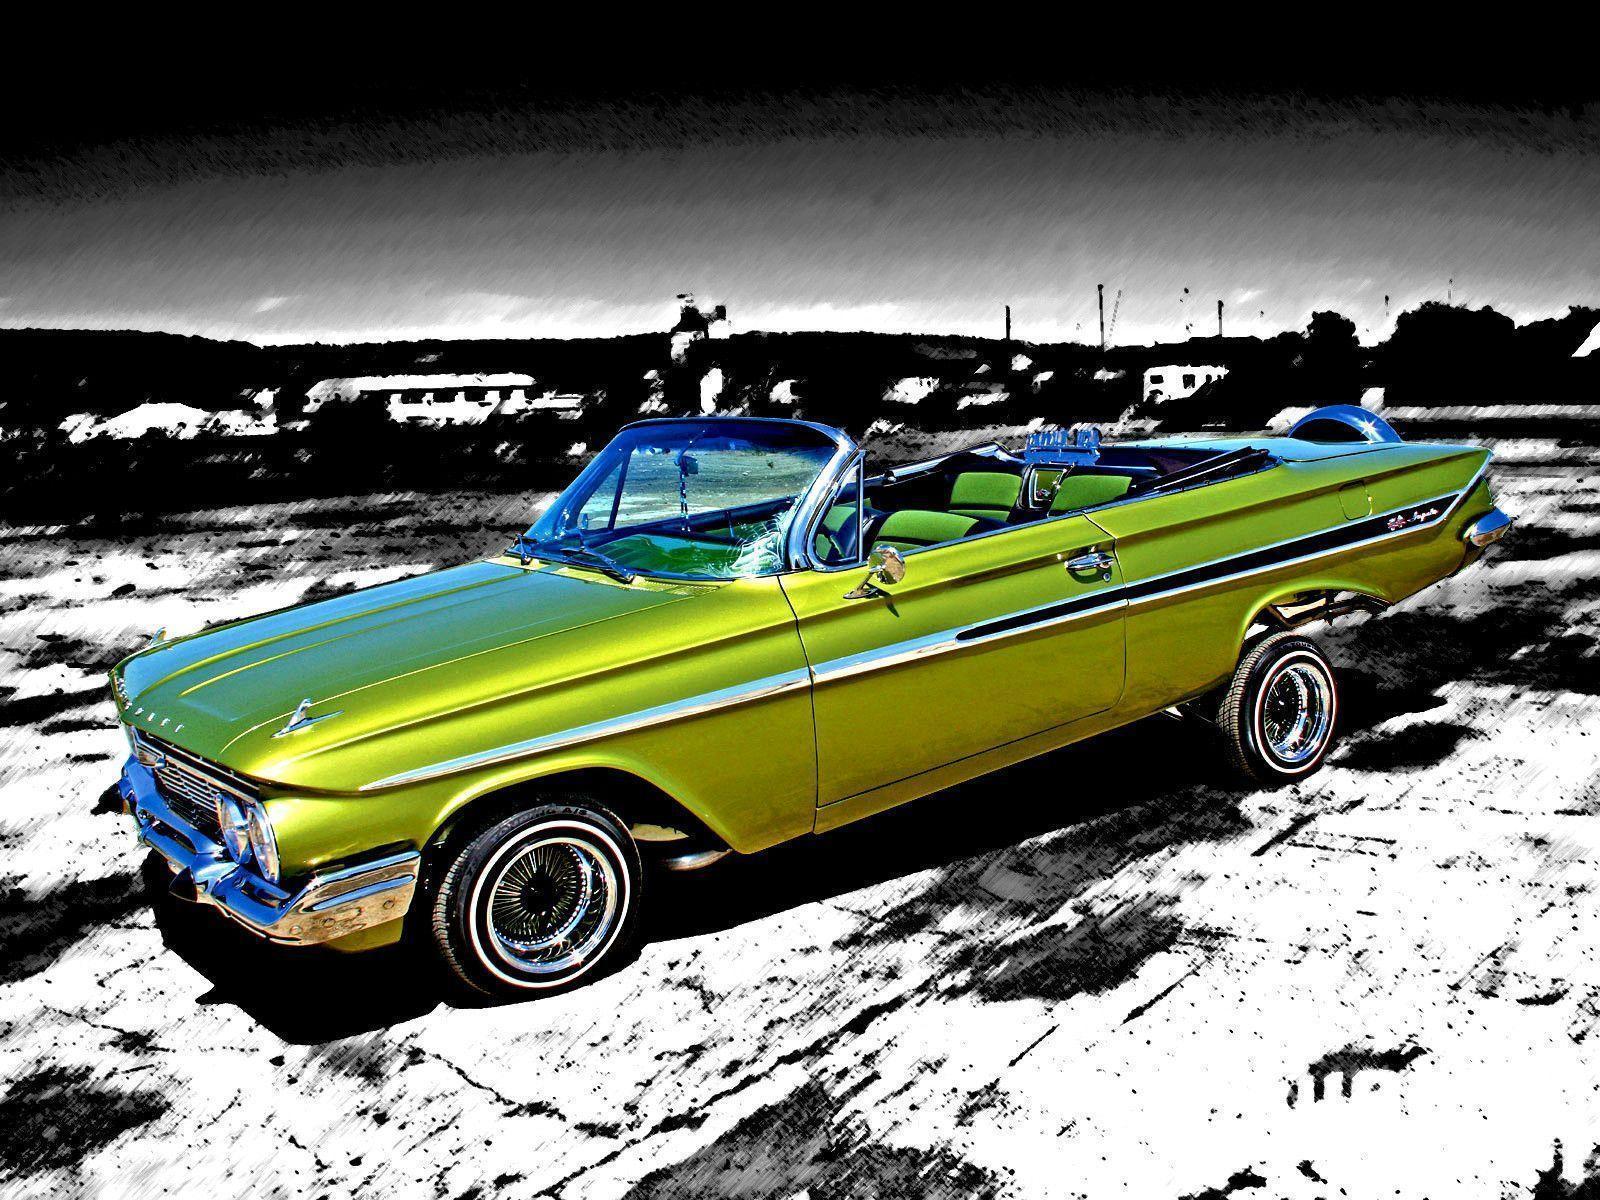 Car Club 4 You Car Picture and Car wallapers: lowrider cars picture